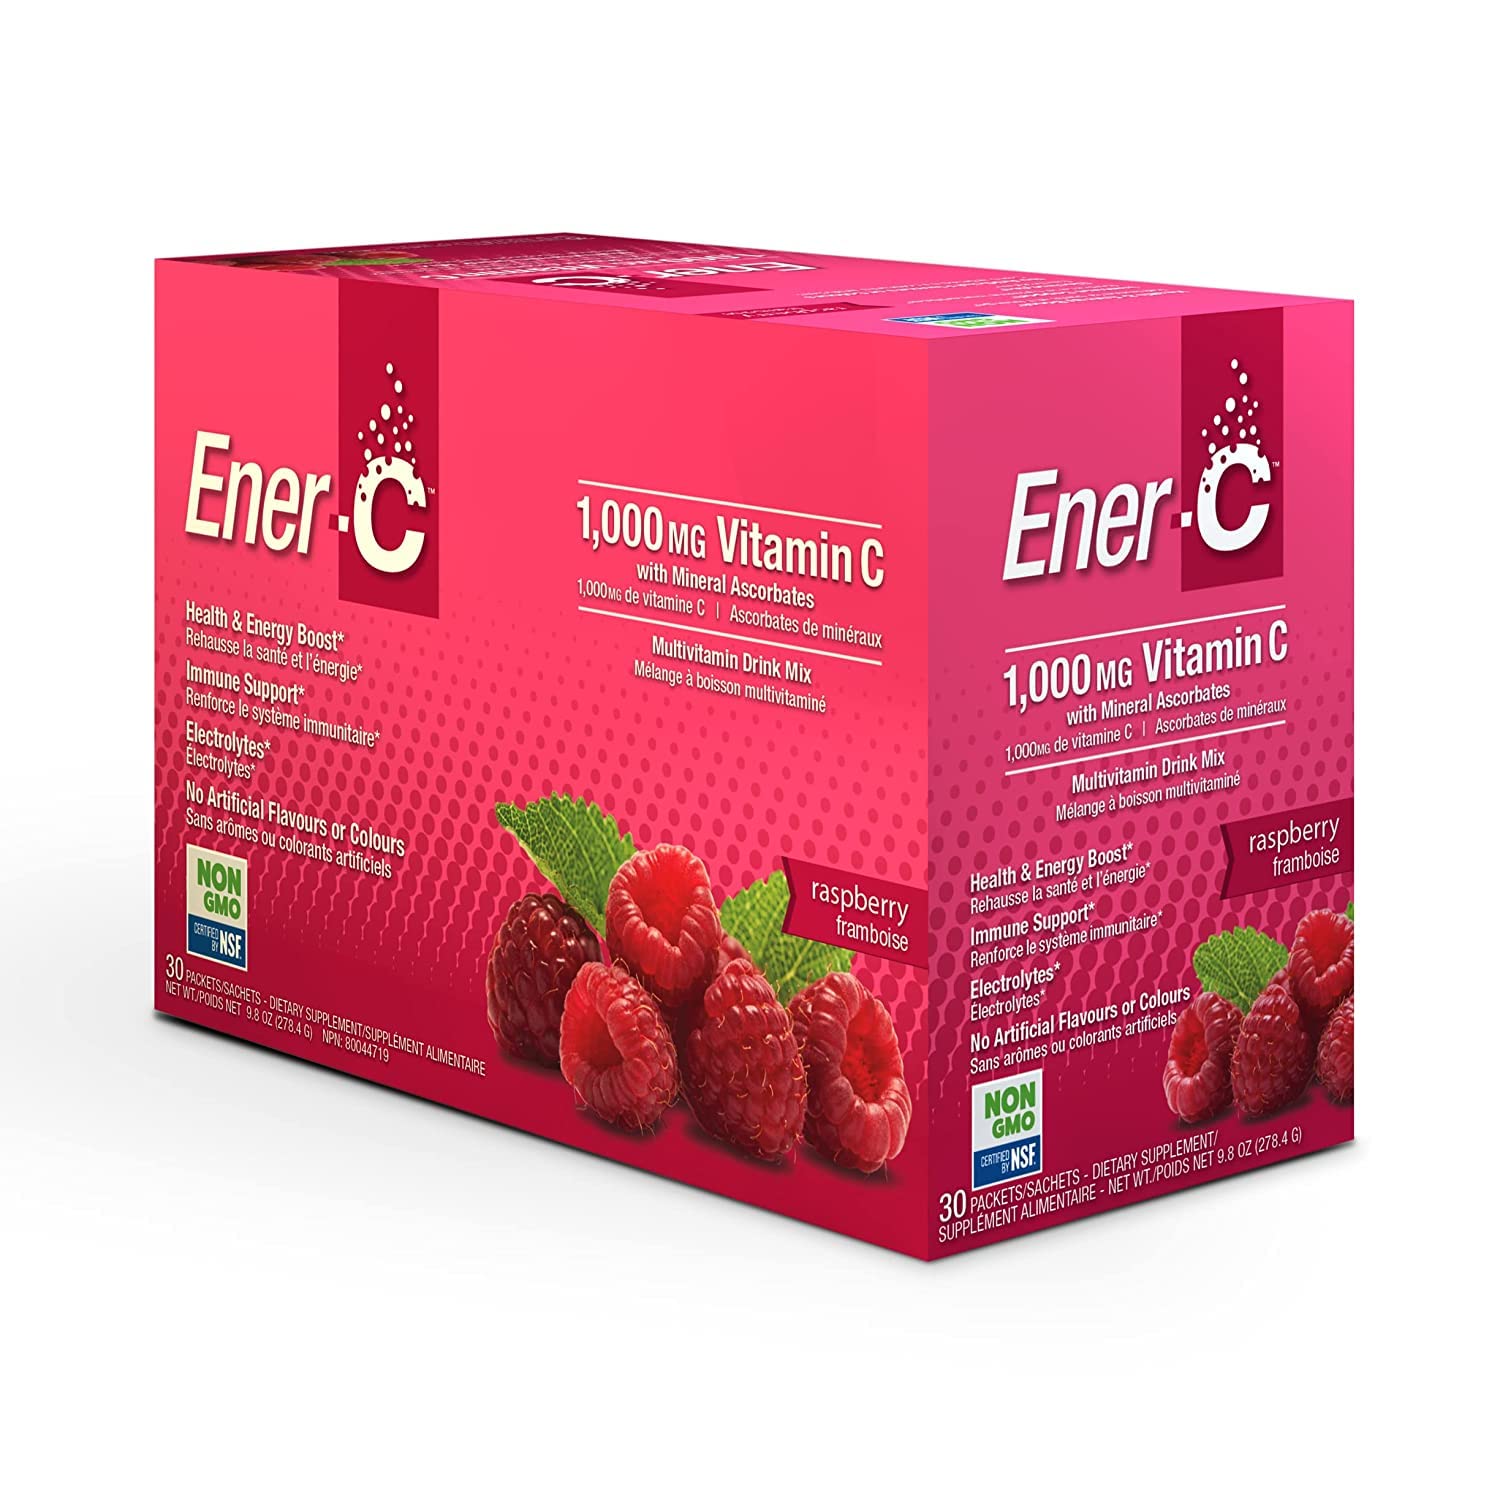 Ener-C Raspberry Multivitamin Drink Mix, 1000mg Vitamin C, Non-GMO, Vegan, Real Fruit Juice Powders, Natural Immunity Support, Electrolytes, Gluten Free, 30 Count (Pack of 1)